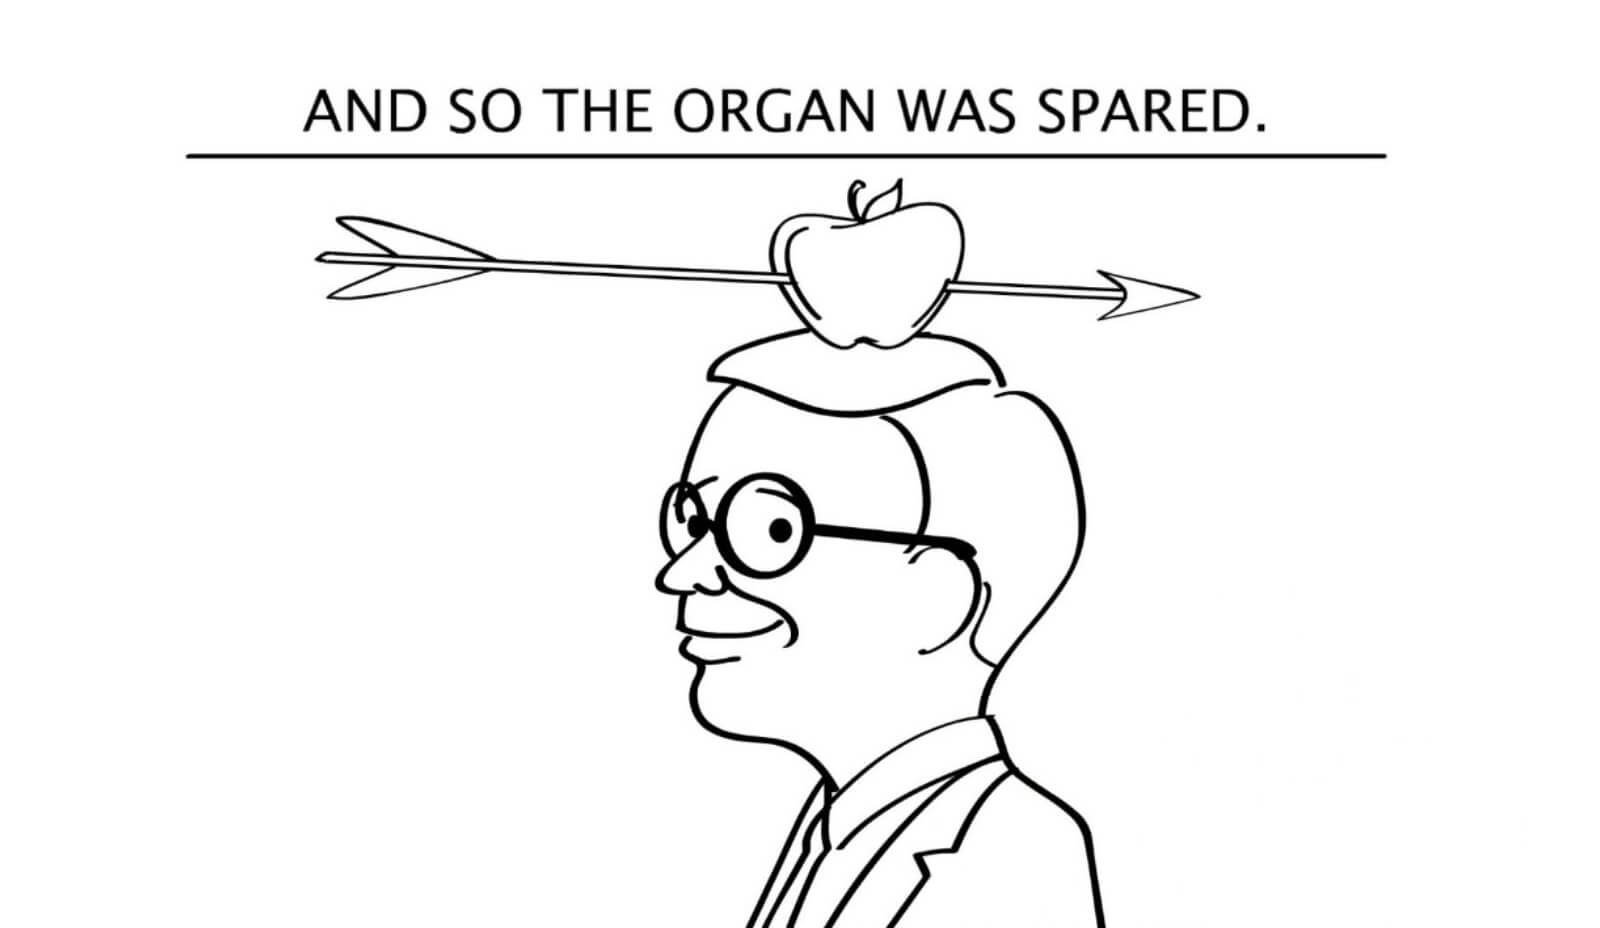 And so the organ was spared.